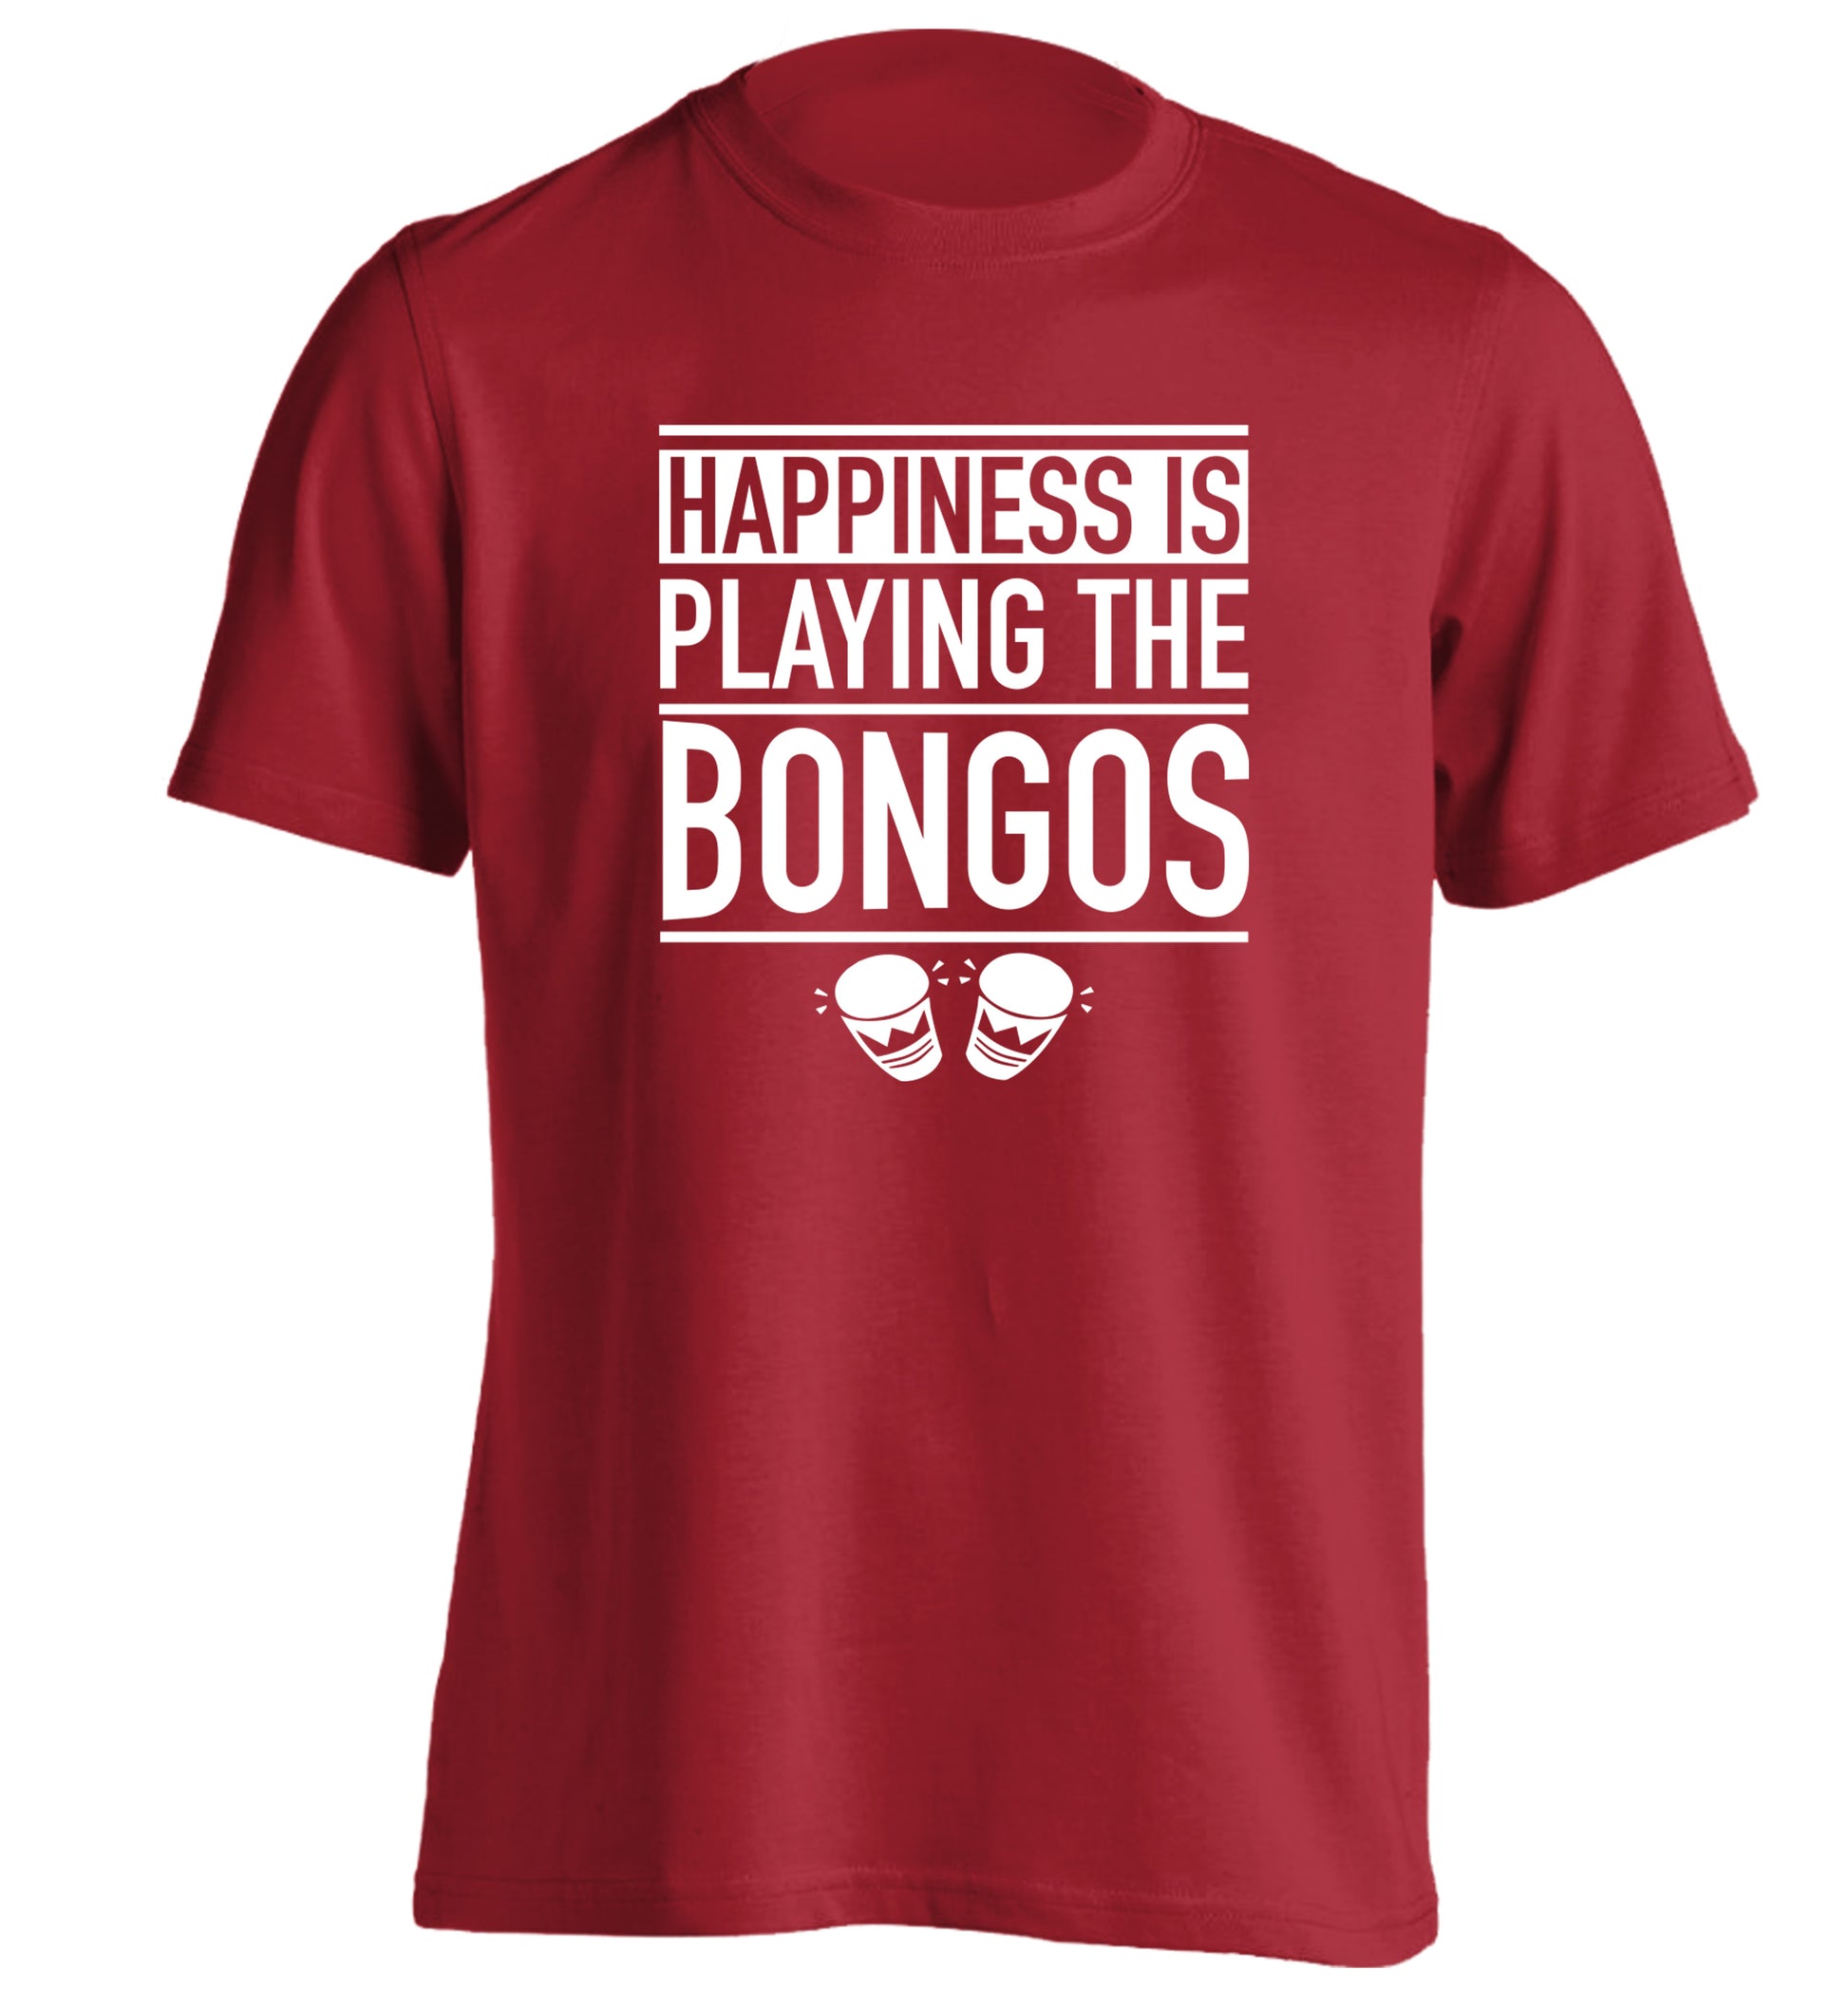 Happiness is playing the bongos adults unisex red Tshirt 2XL